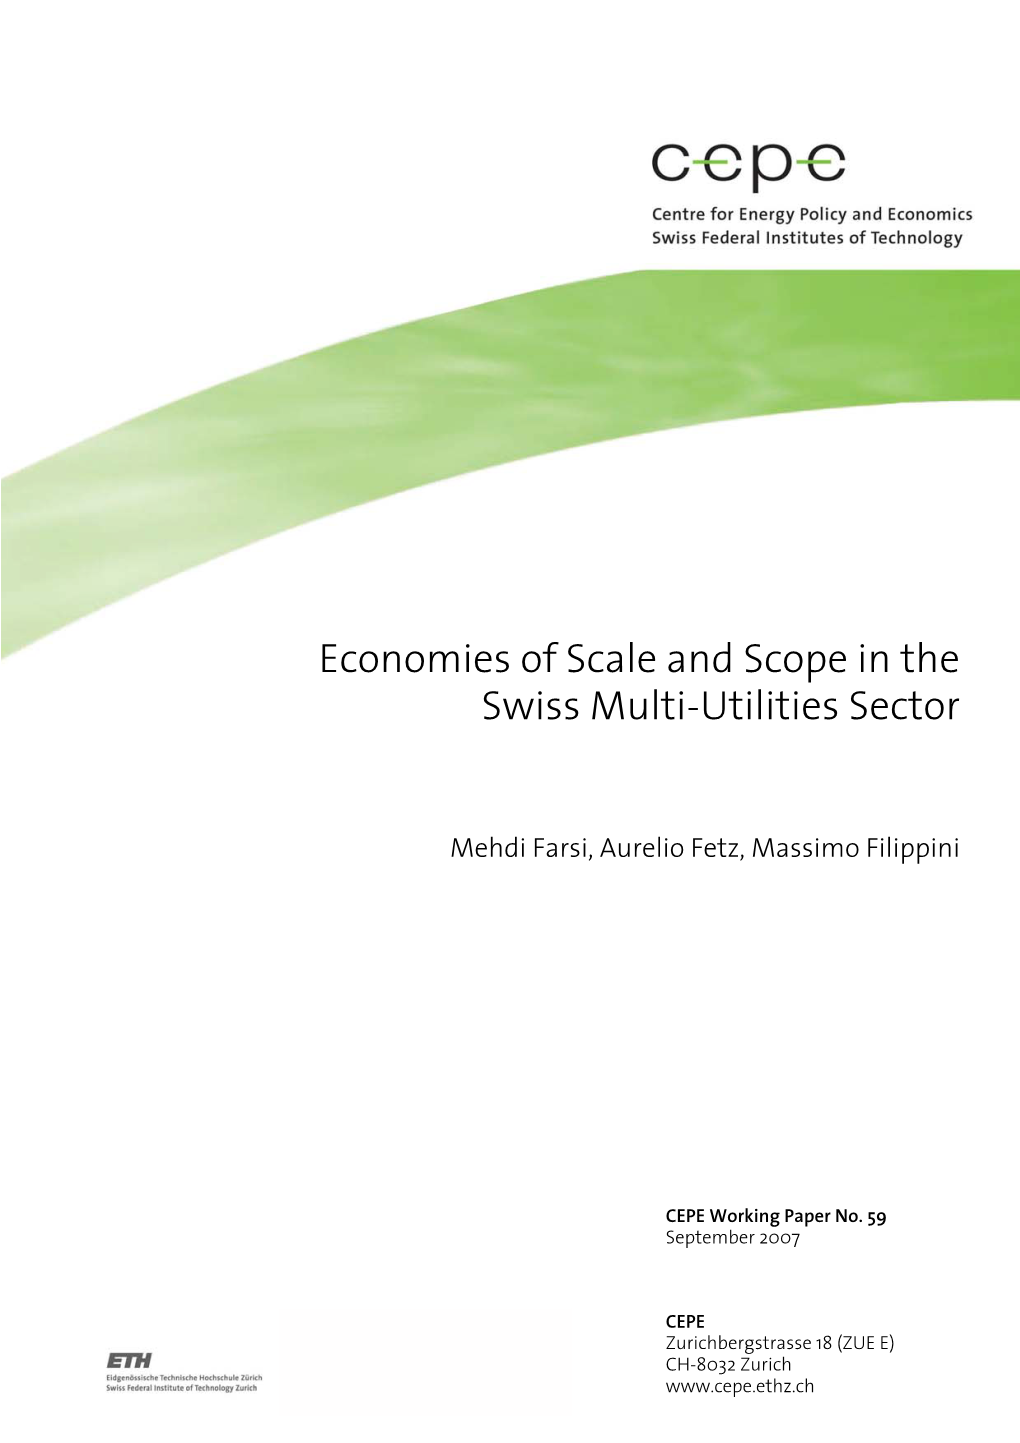 Economies of Scale and Scope in the Swiss Multi-Utilities Sector